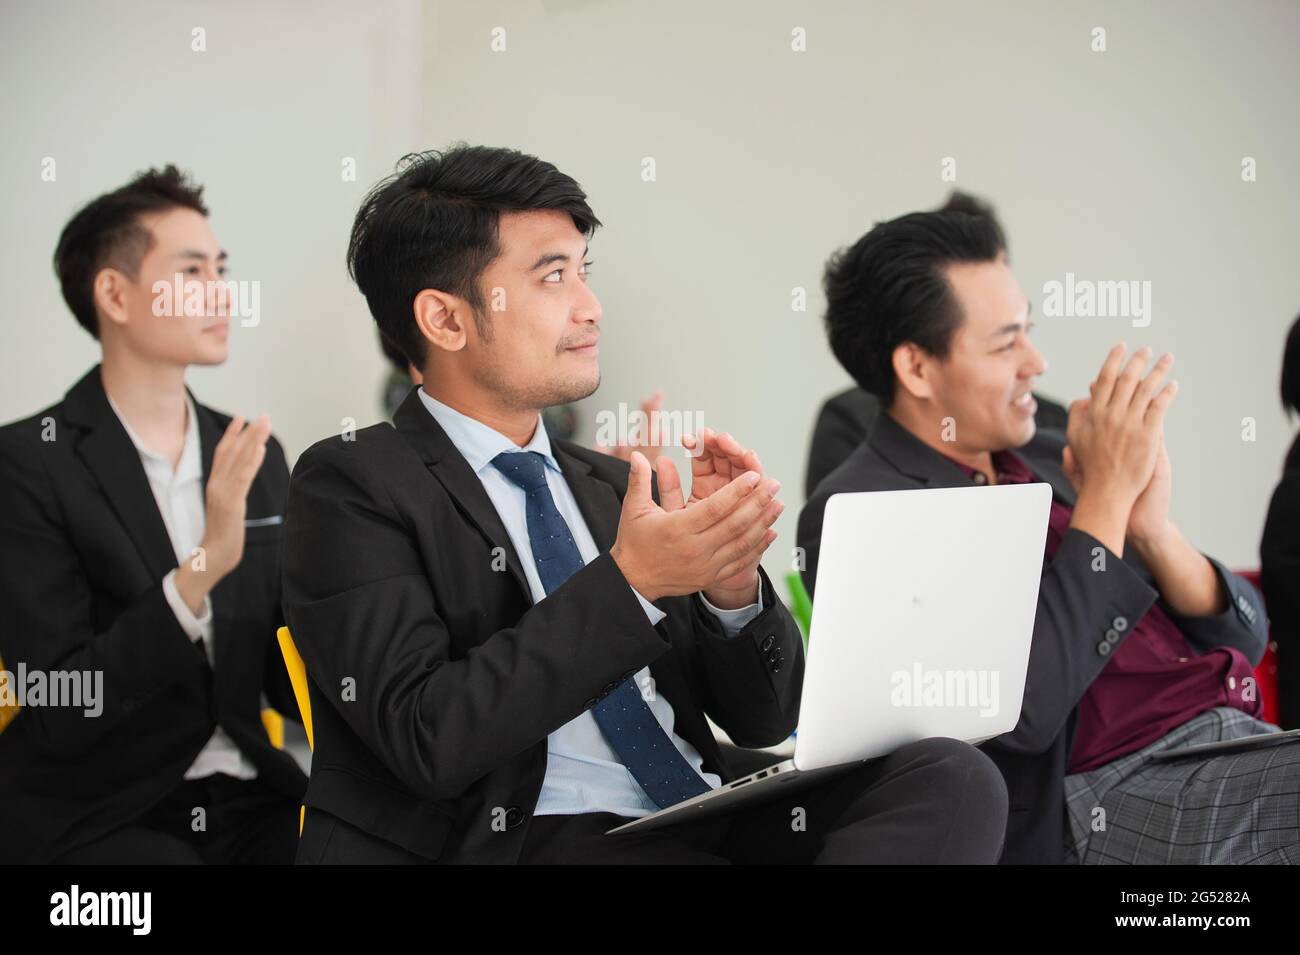 People congratulate on business meeting, People clap their congratulate in seminar Stock Photo